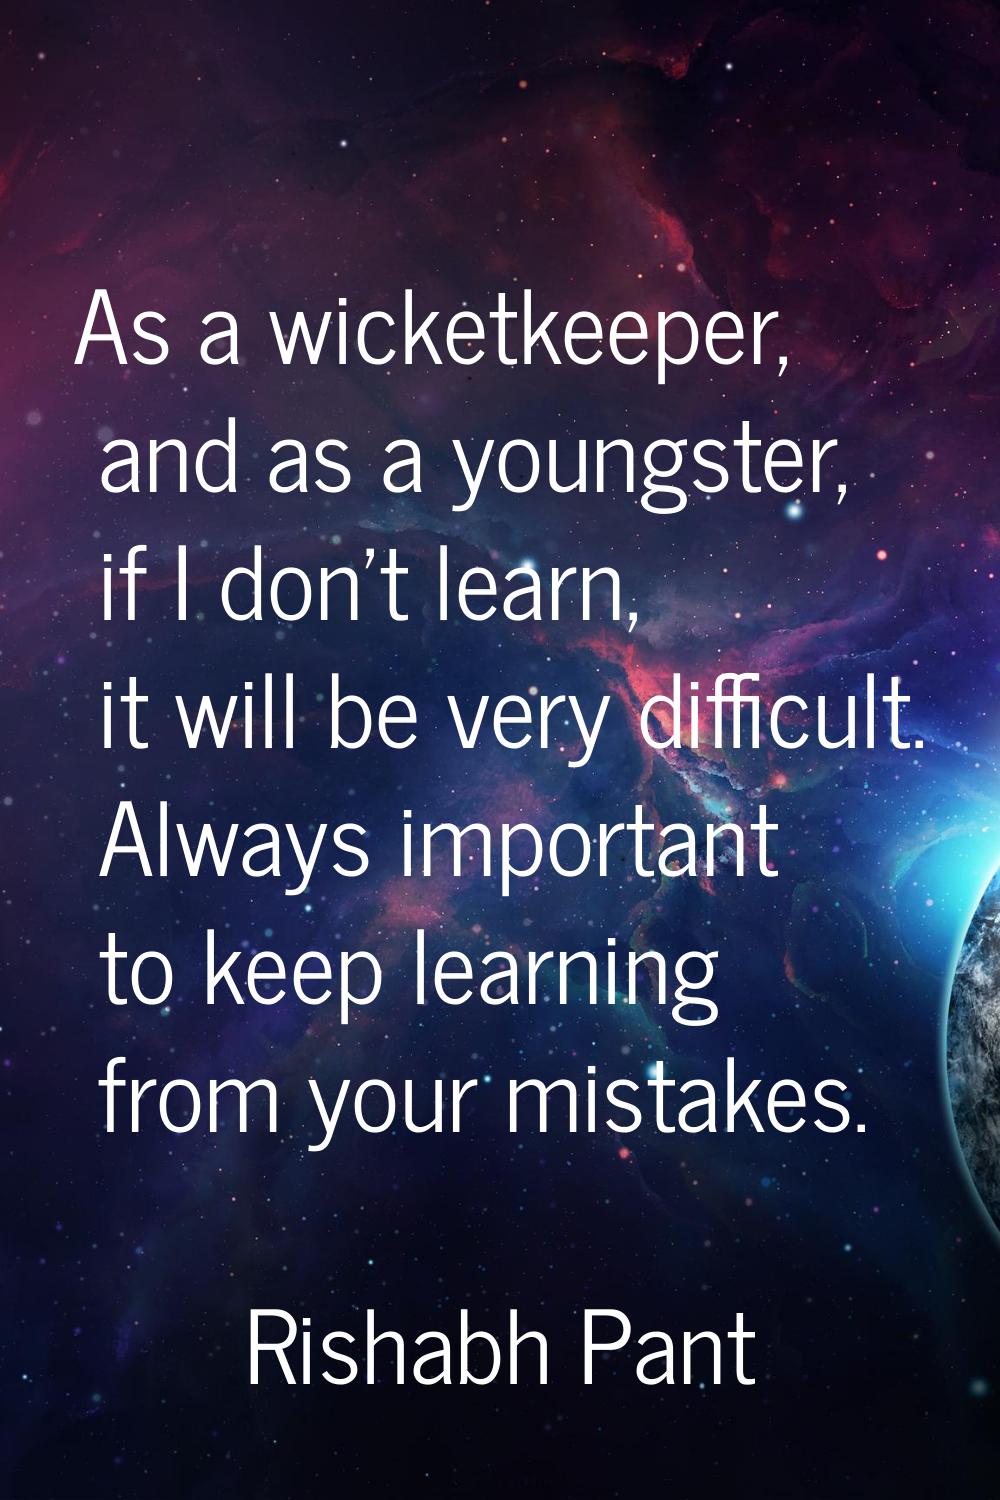 As a wicketkeeper, and as a youngster, if I don't learn, it will be very difficult. Always importan